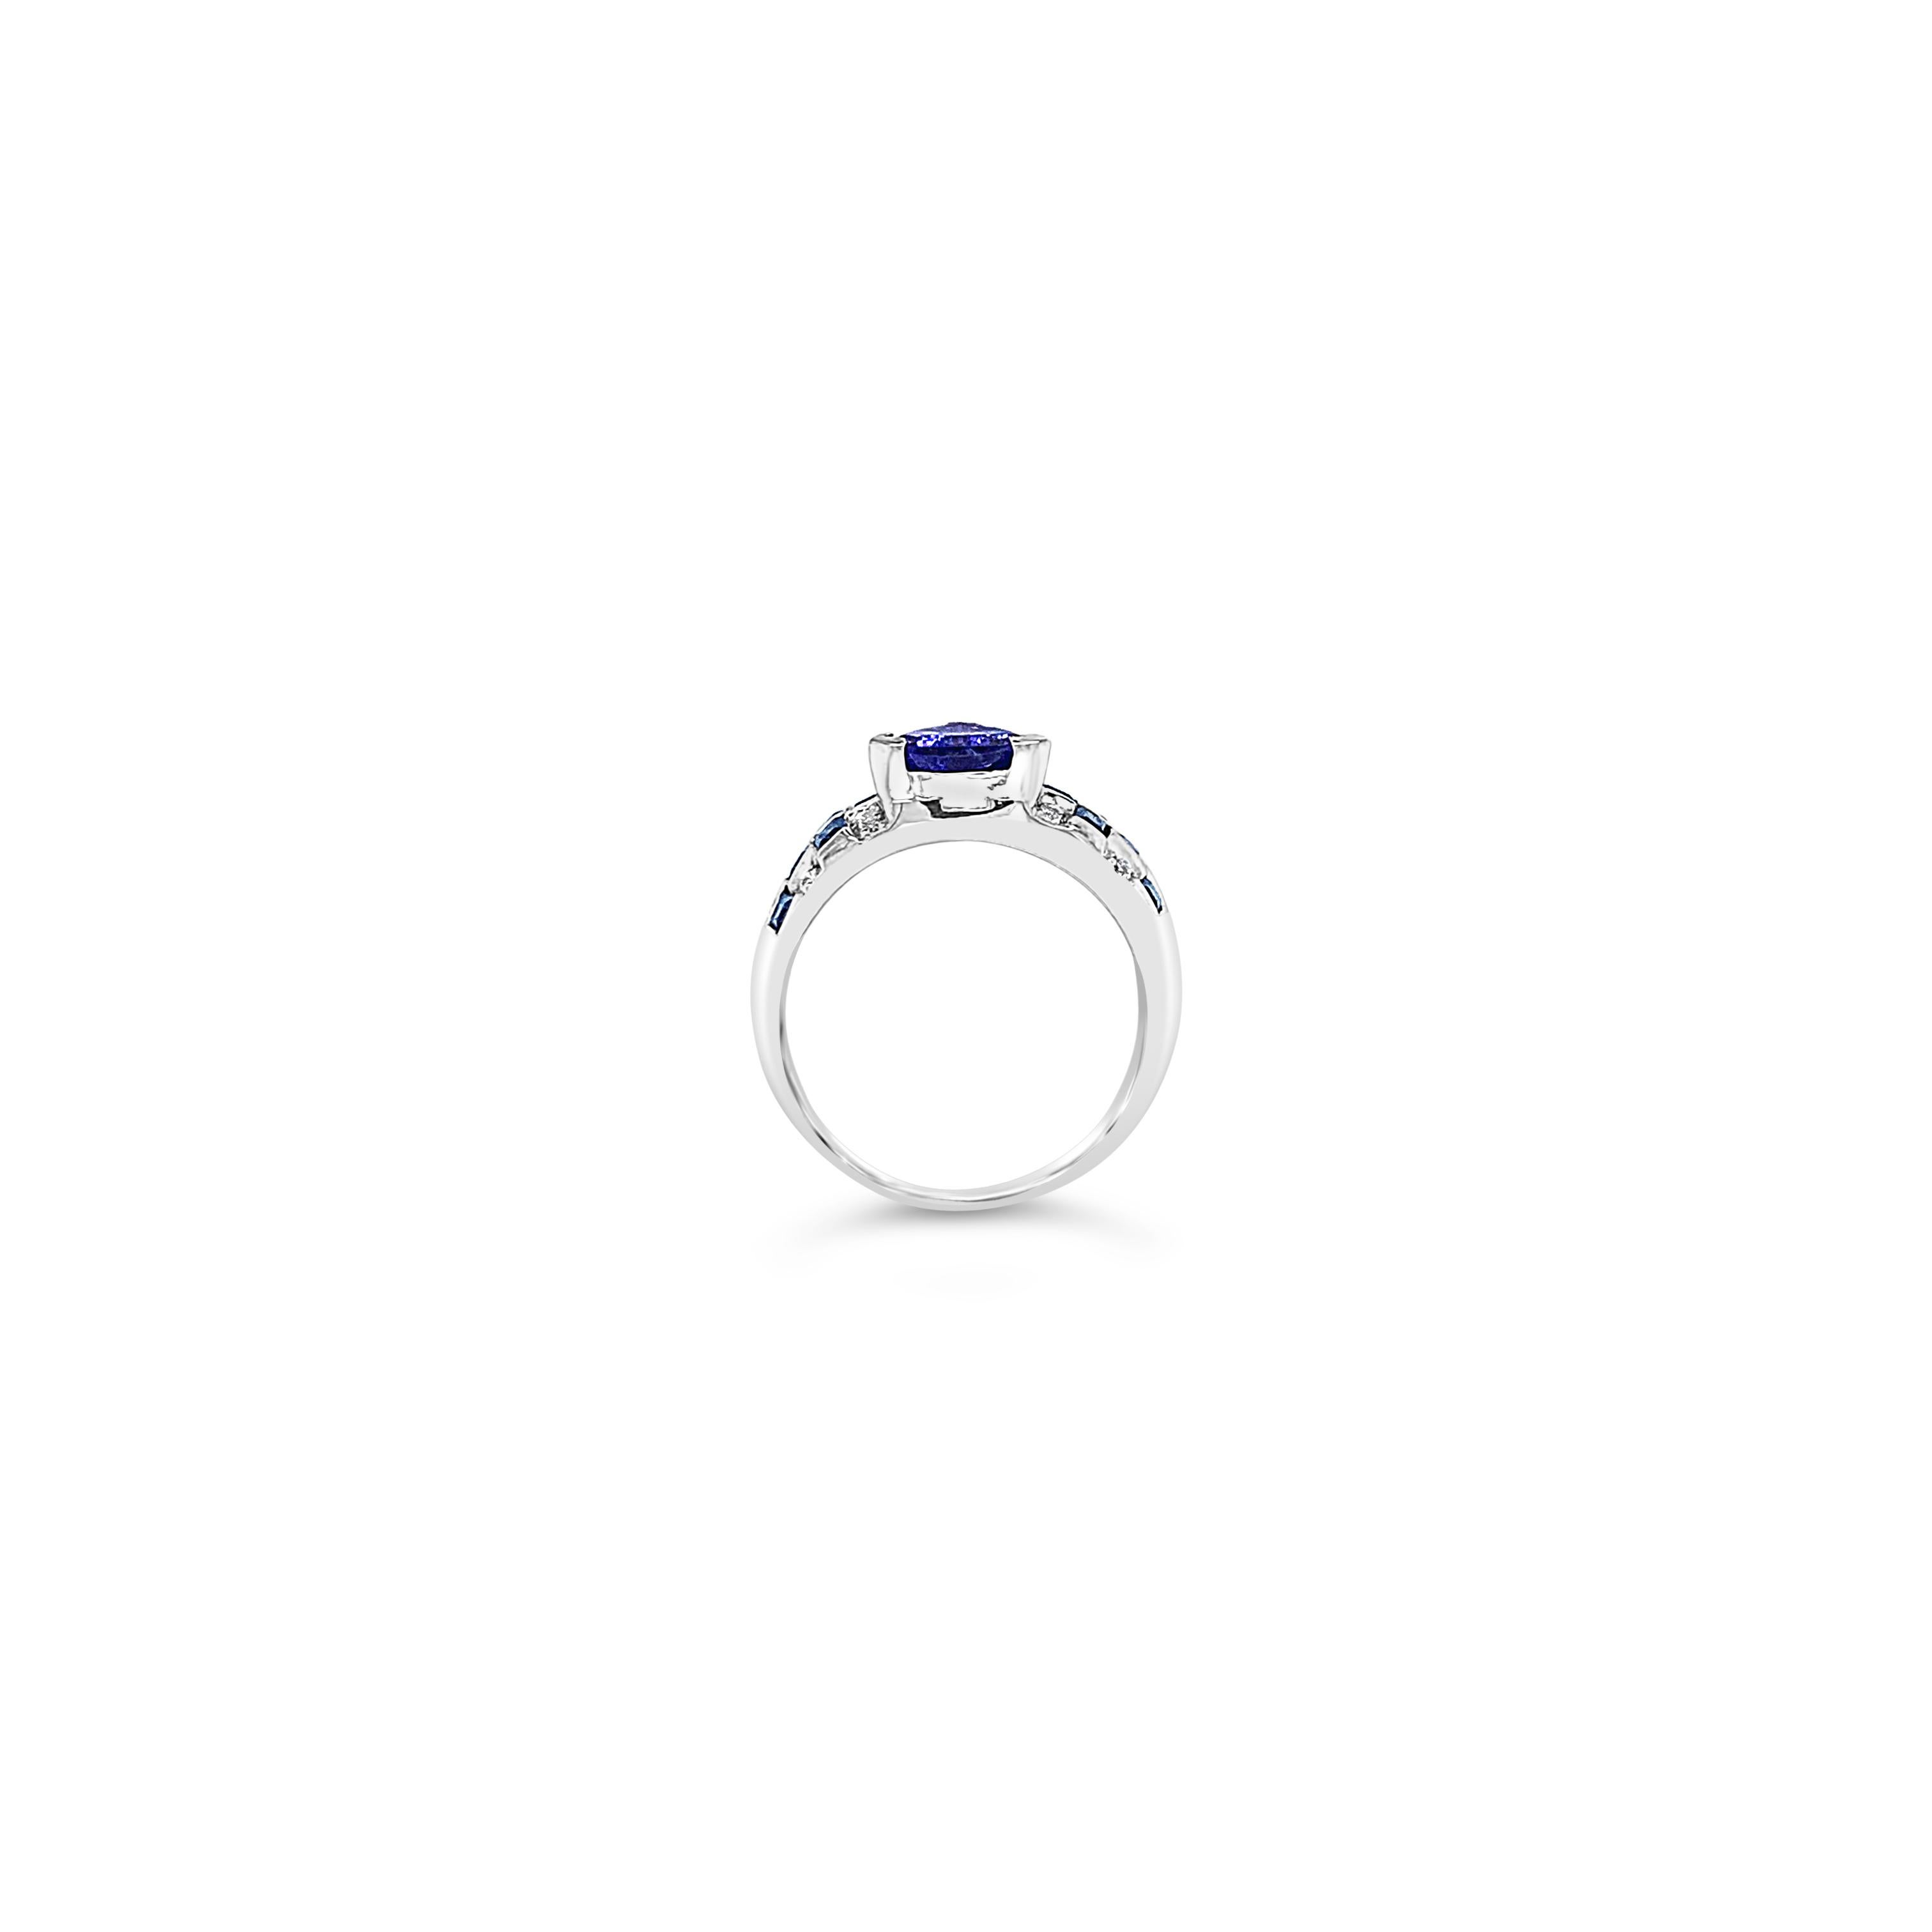 Grand Sample Sale Ring featuring 1 1/3 cts. Blueberry Tanzanite®, 1 1/8 cts. Blueberry Sapphire™, set in 18K Vanilla Gold®. Please feel free to reach out with any questions! Item comes with a Le Vian Grand Sample Sale™ jewelry box as well as a Le